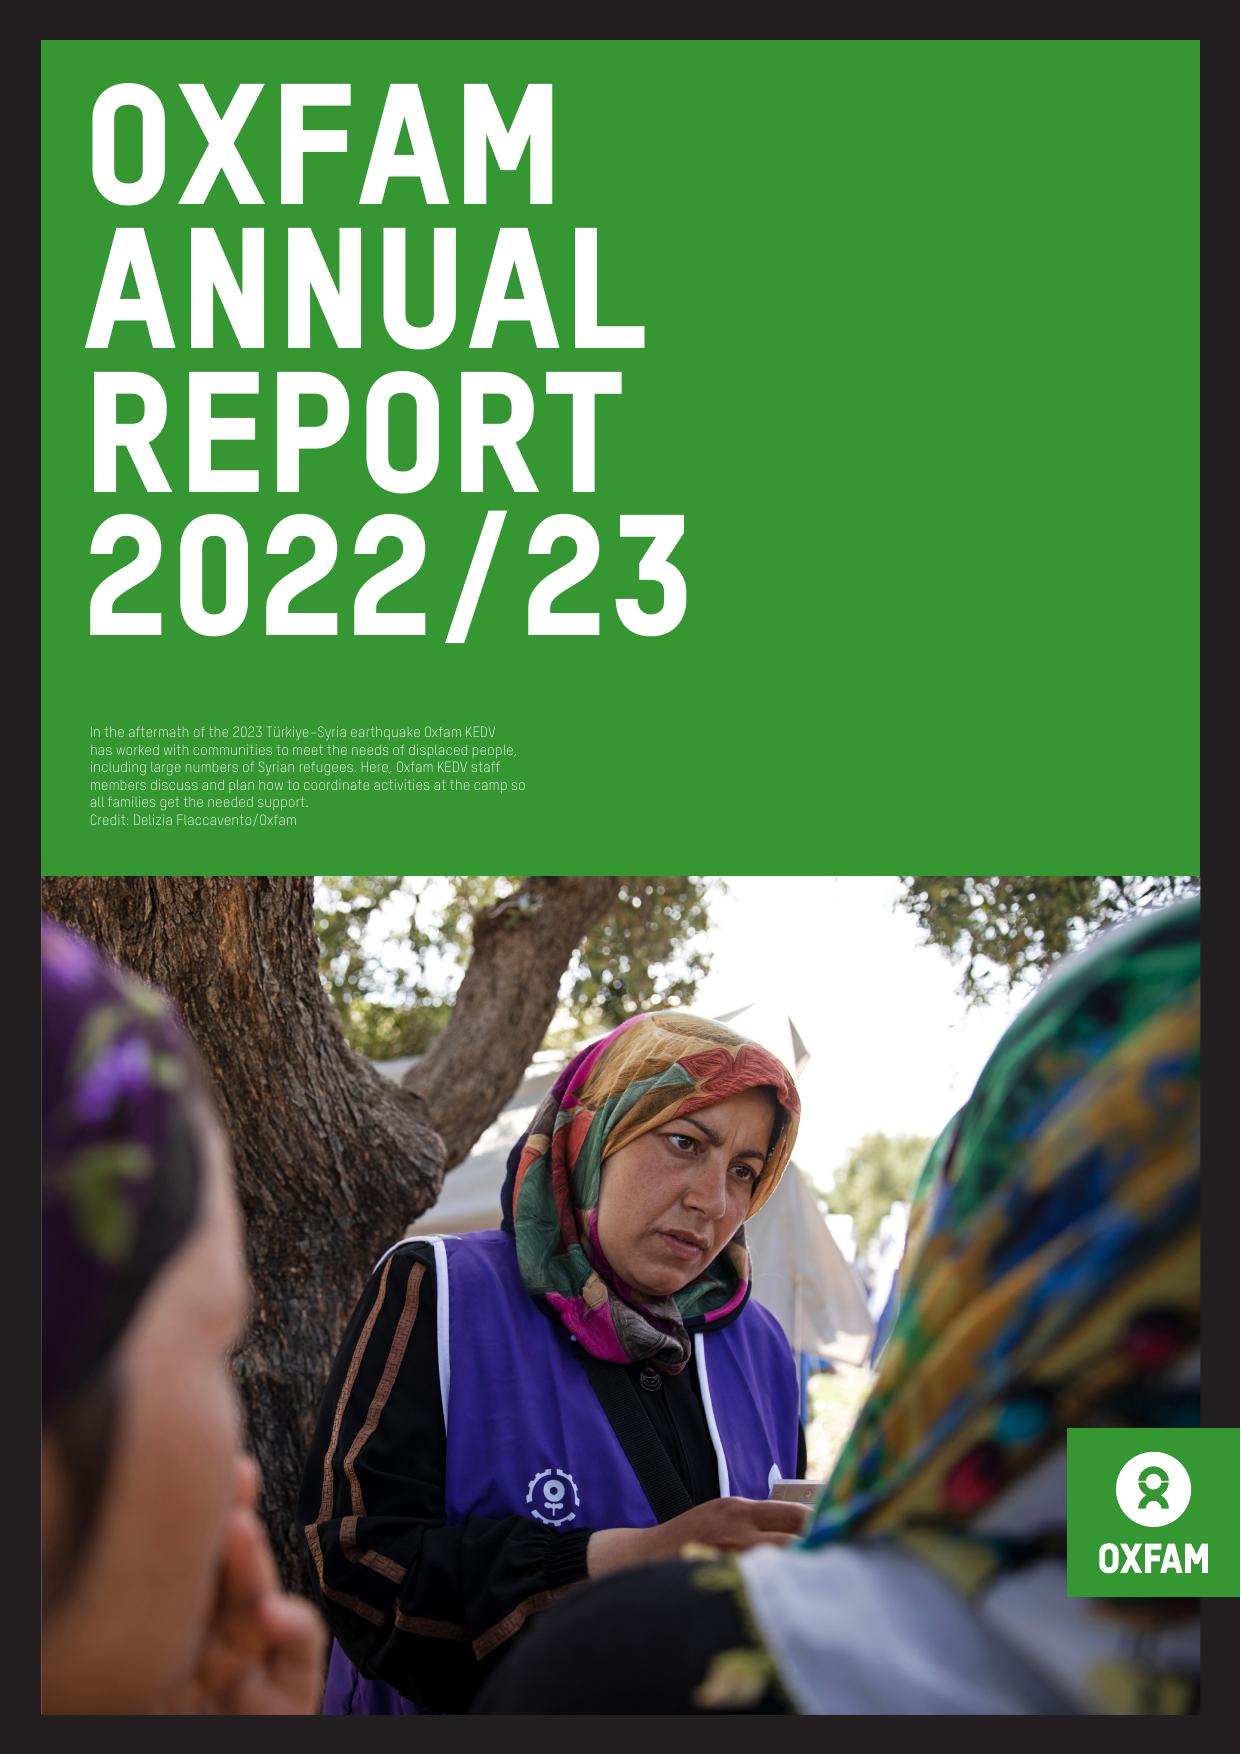 OXFAM.ORG.UK 2022 Annual Report